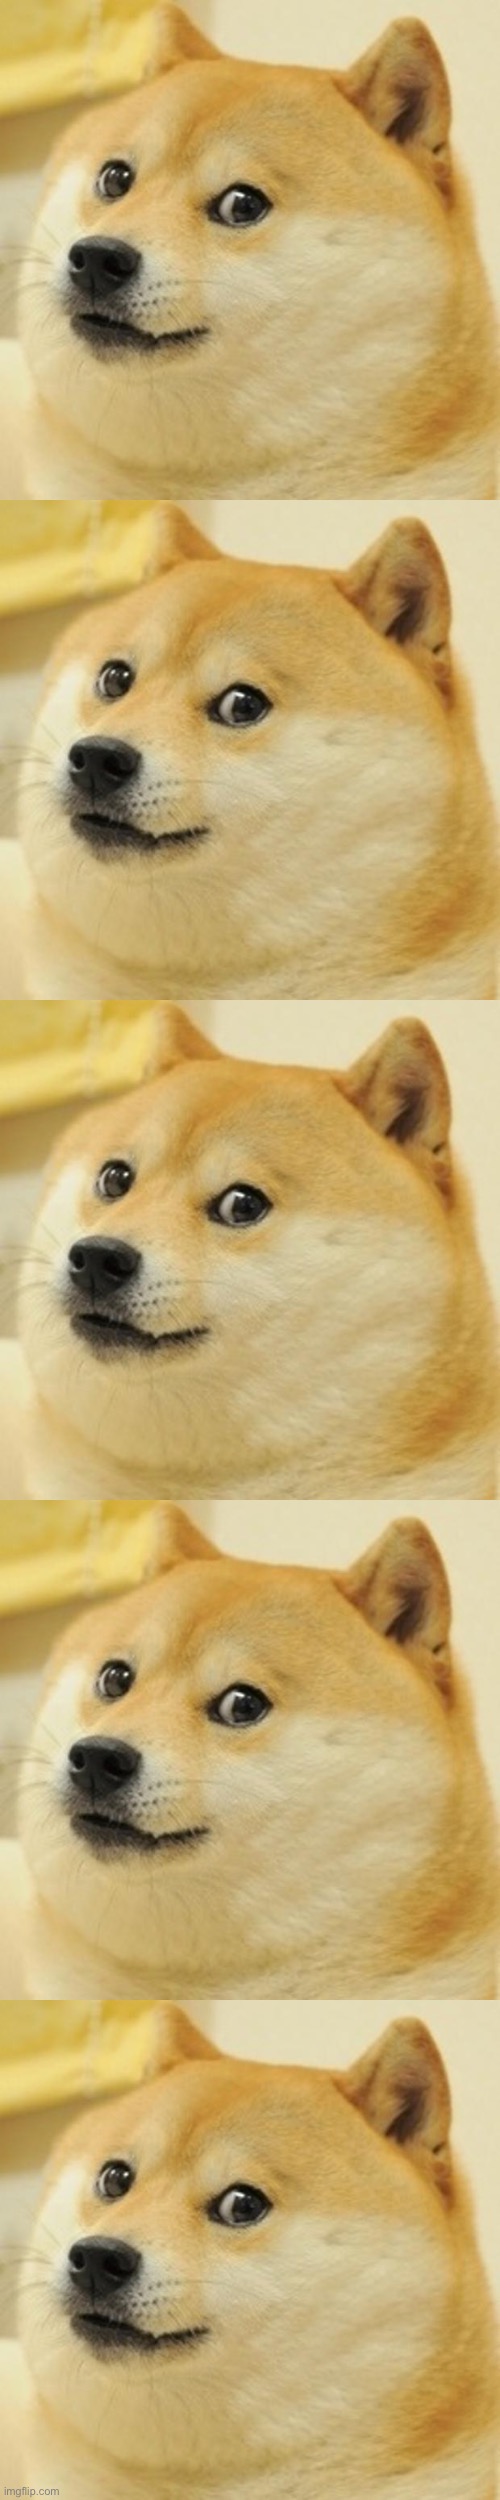 image tagged in memes,doge | made w/ Imgflip meme maker